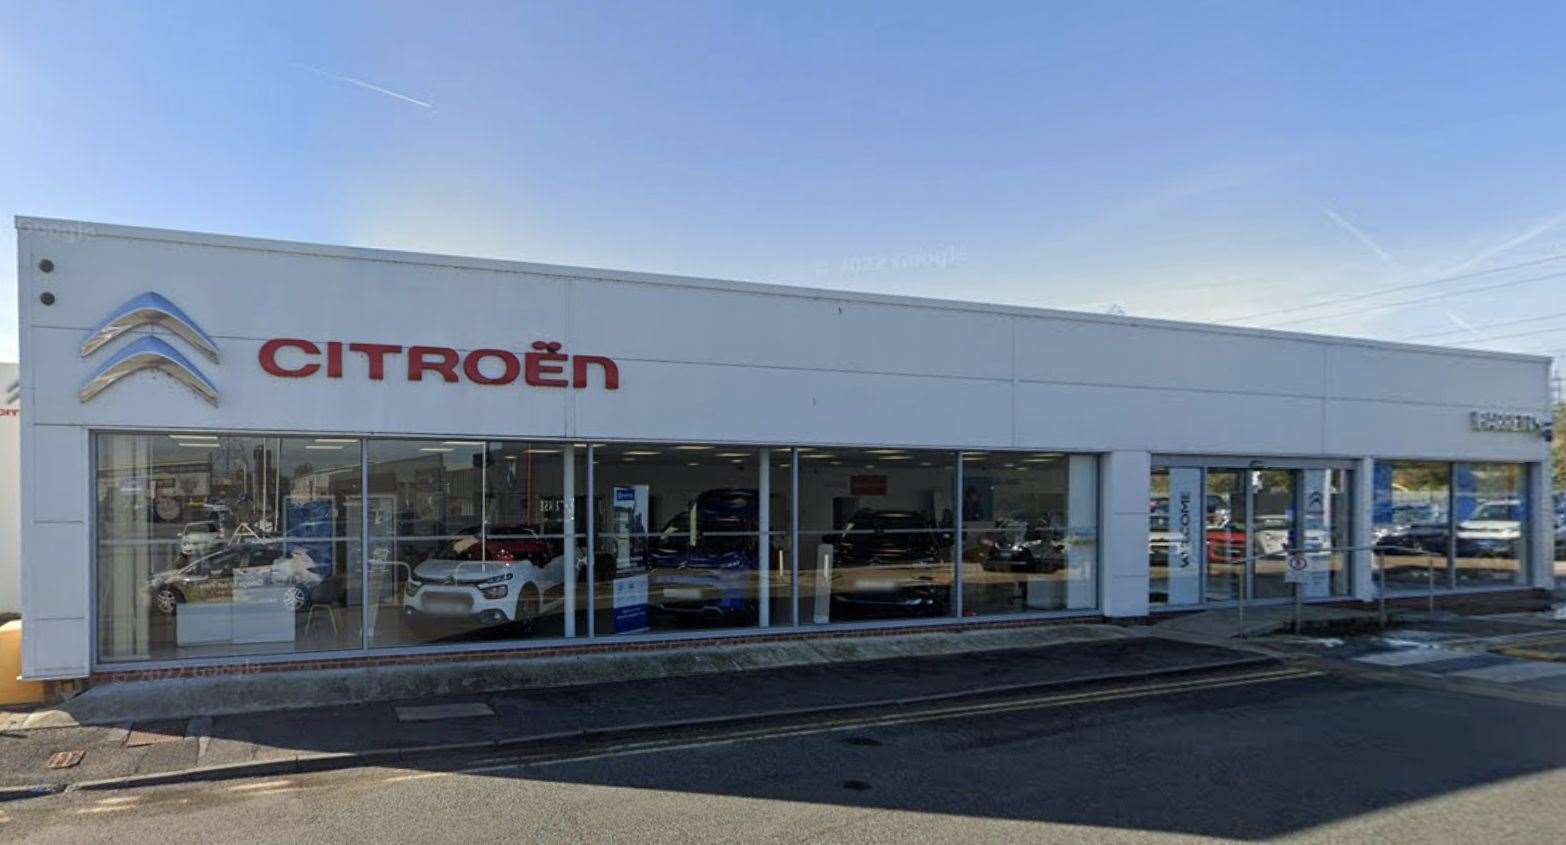 Barretts Citroen along with DS Automotives in Canterbury are closing. Picture: Google